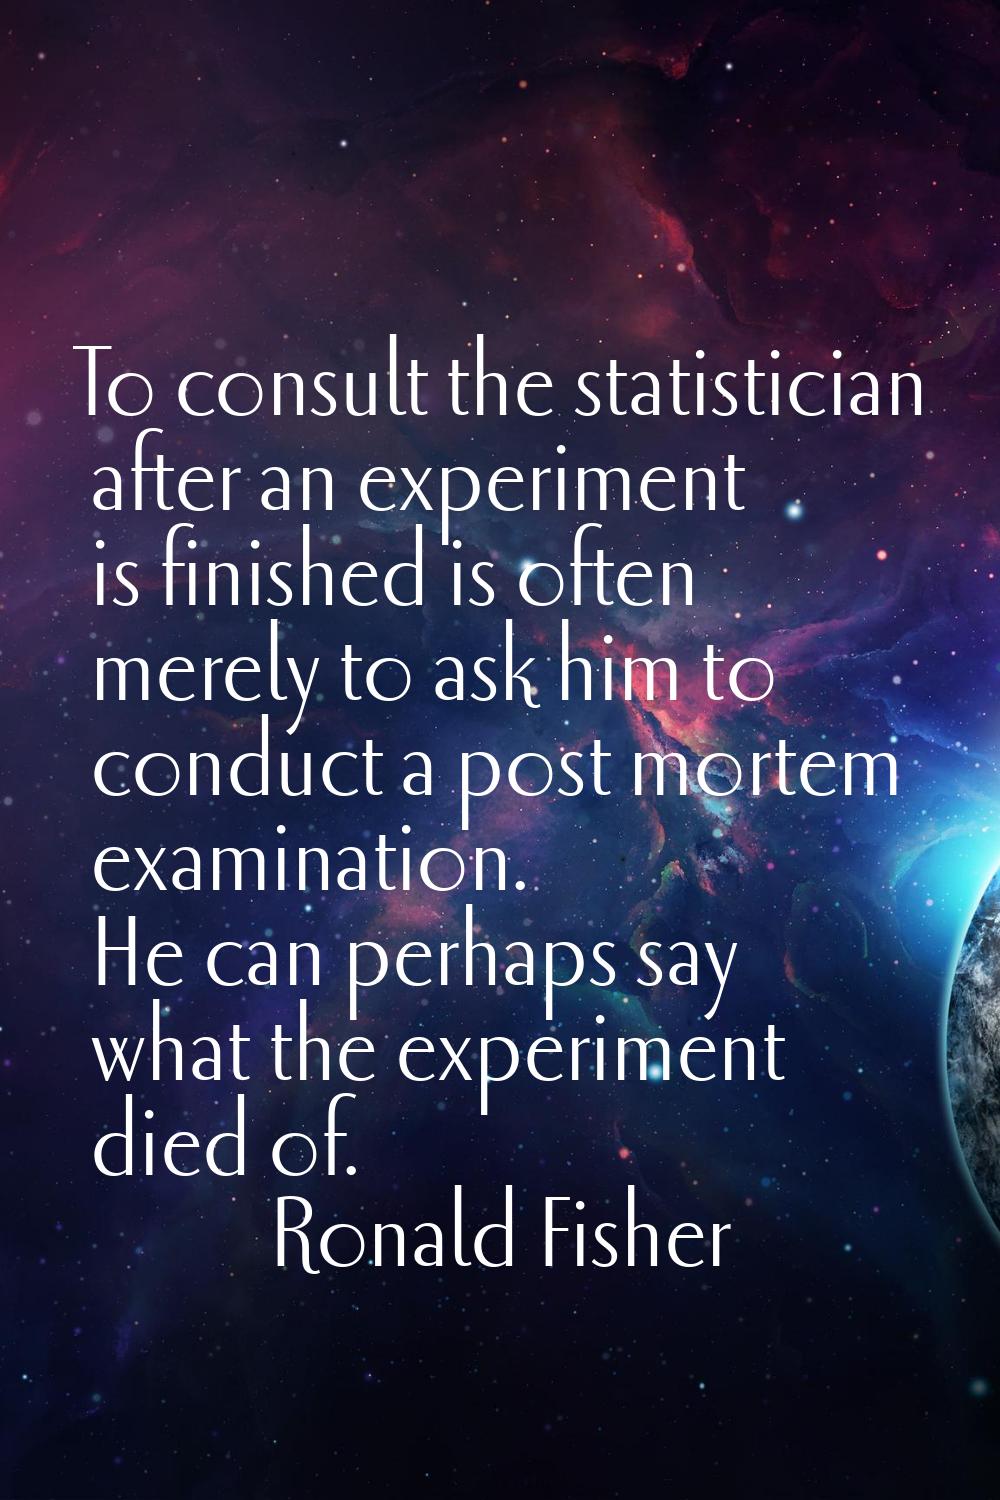 To consult the statistician after an experiment is finished is often merely to ask him to conduct a